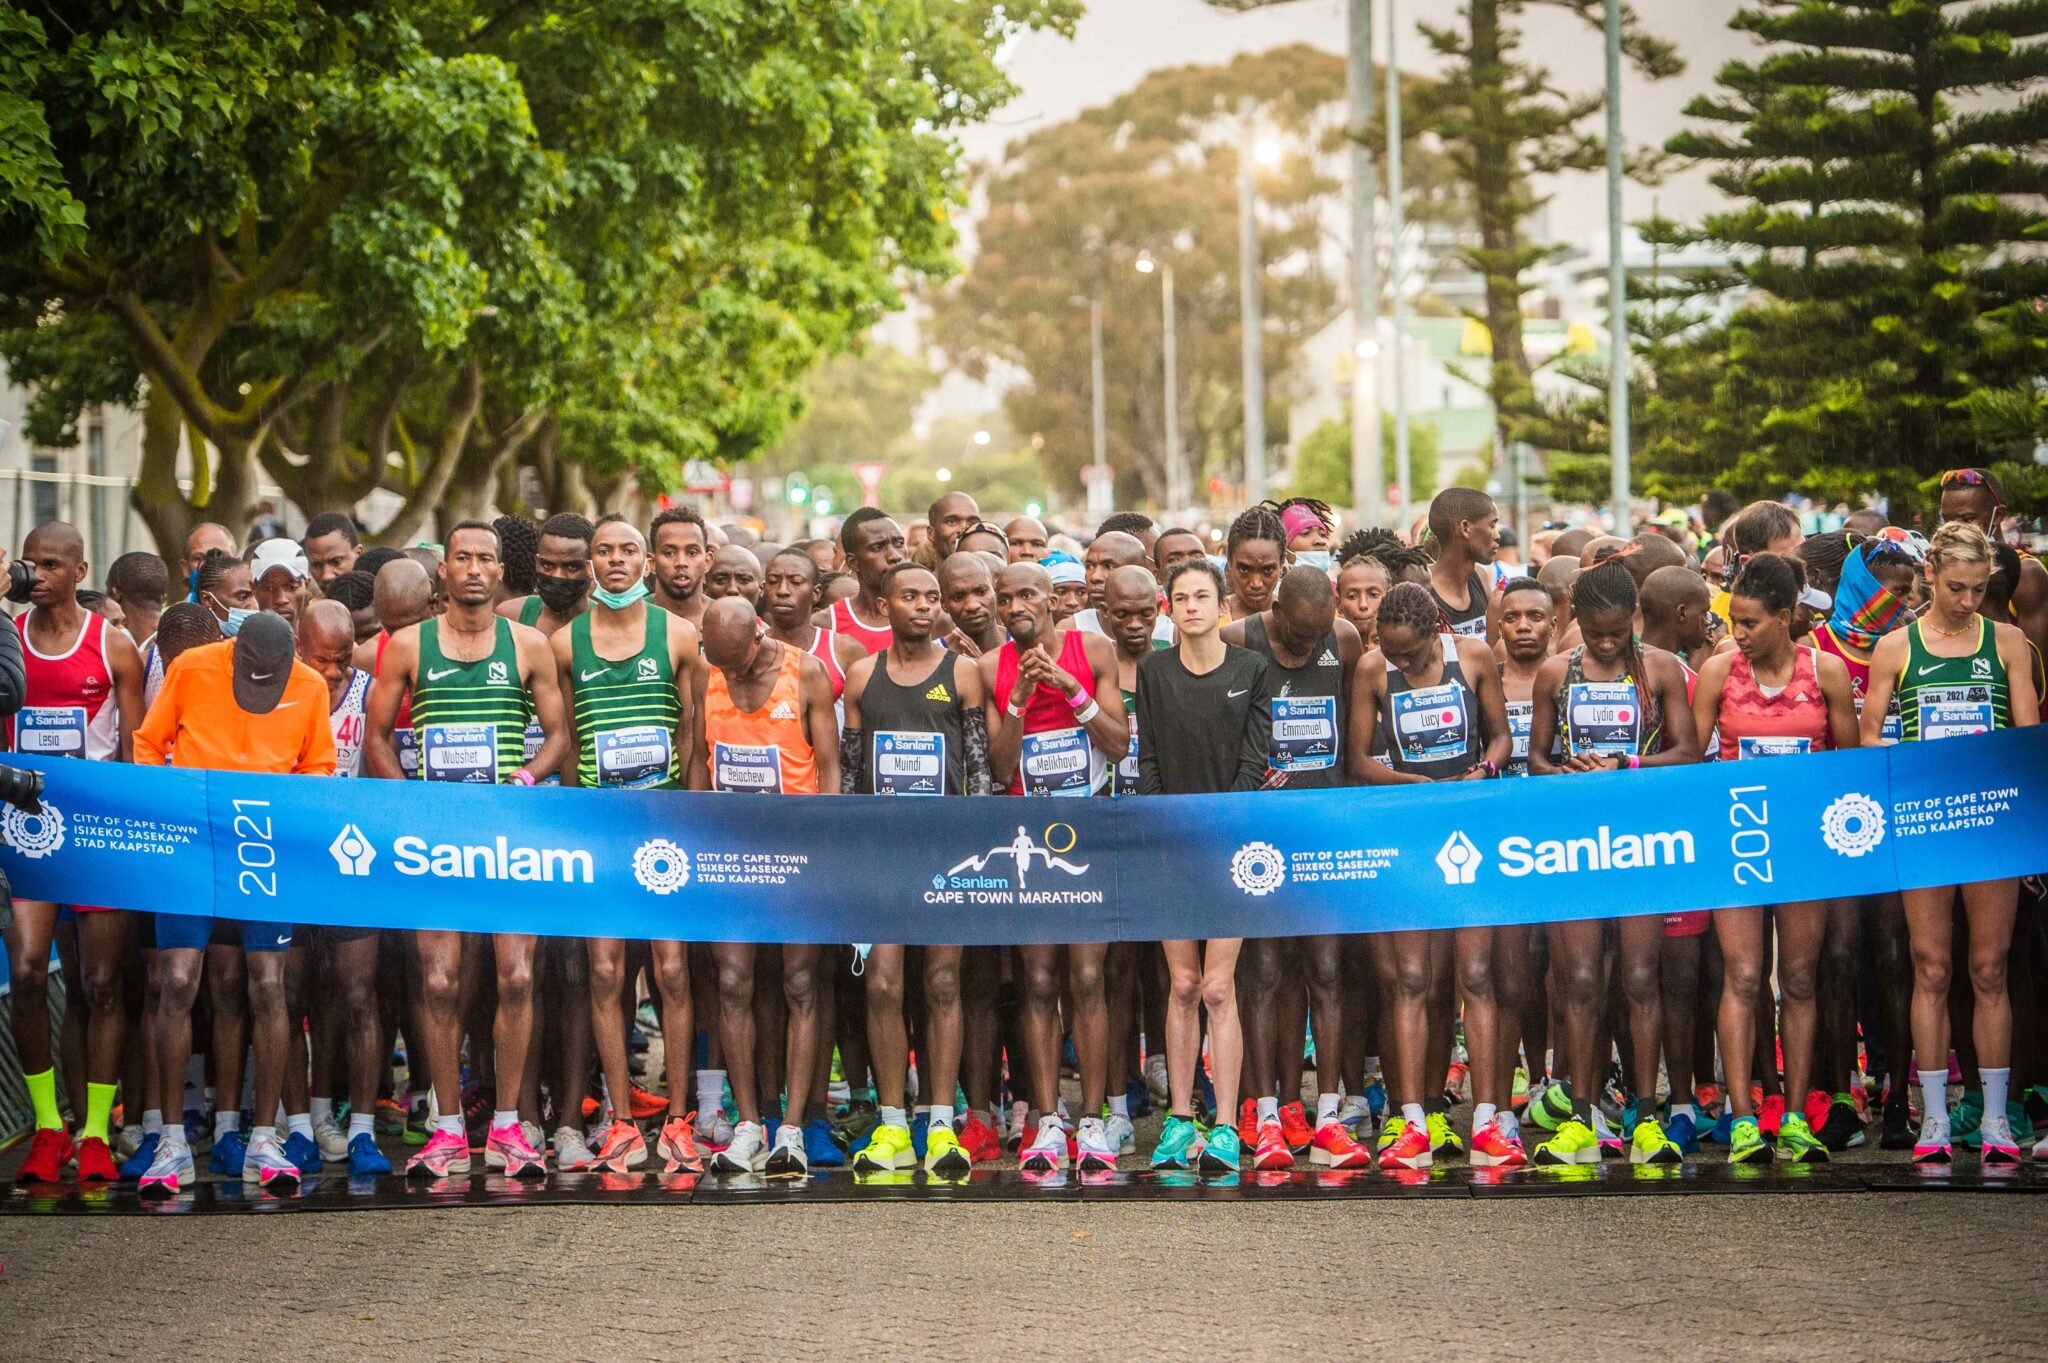 How to Track Your Runner at the Sanlam Cape Town Marathon